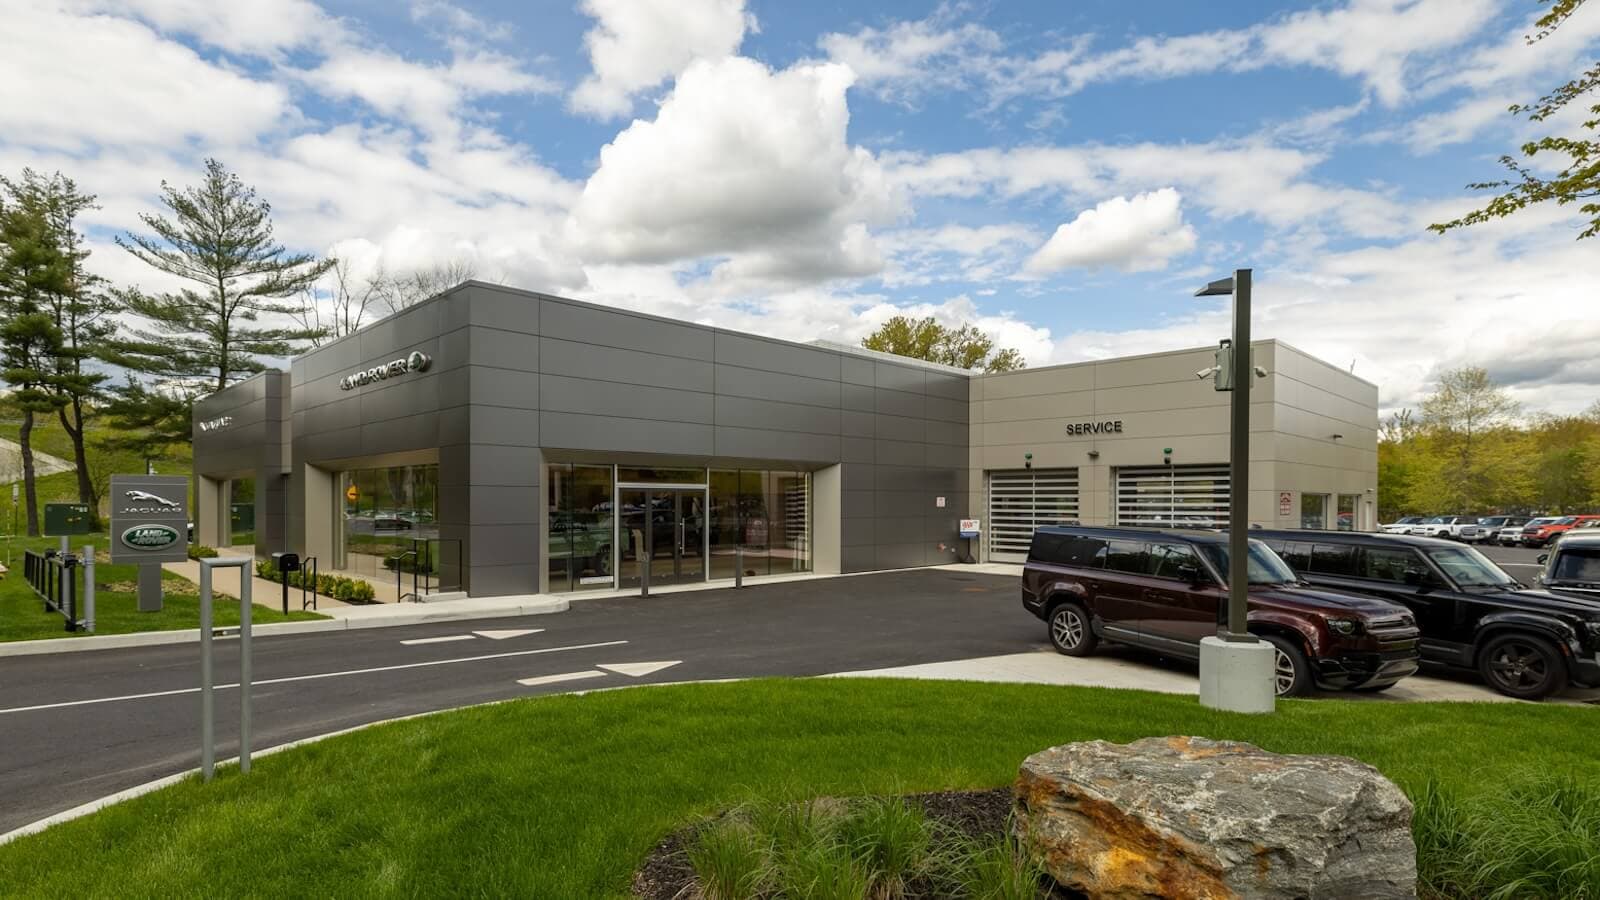 Exterior view of Land Rover Mt. Kisco